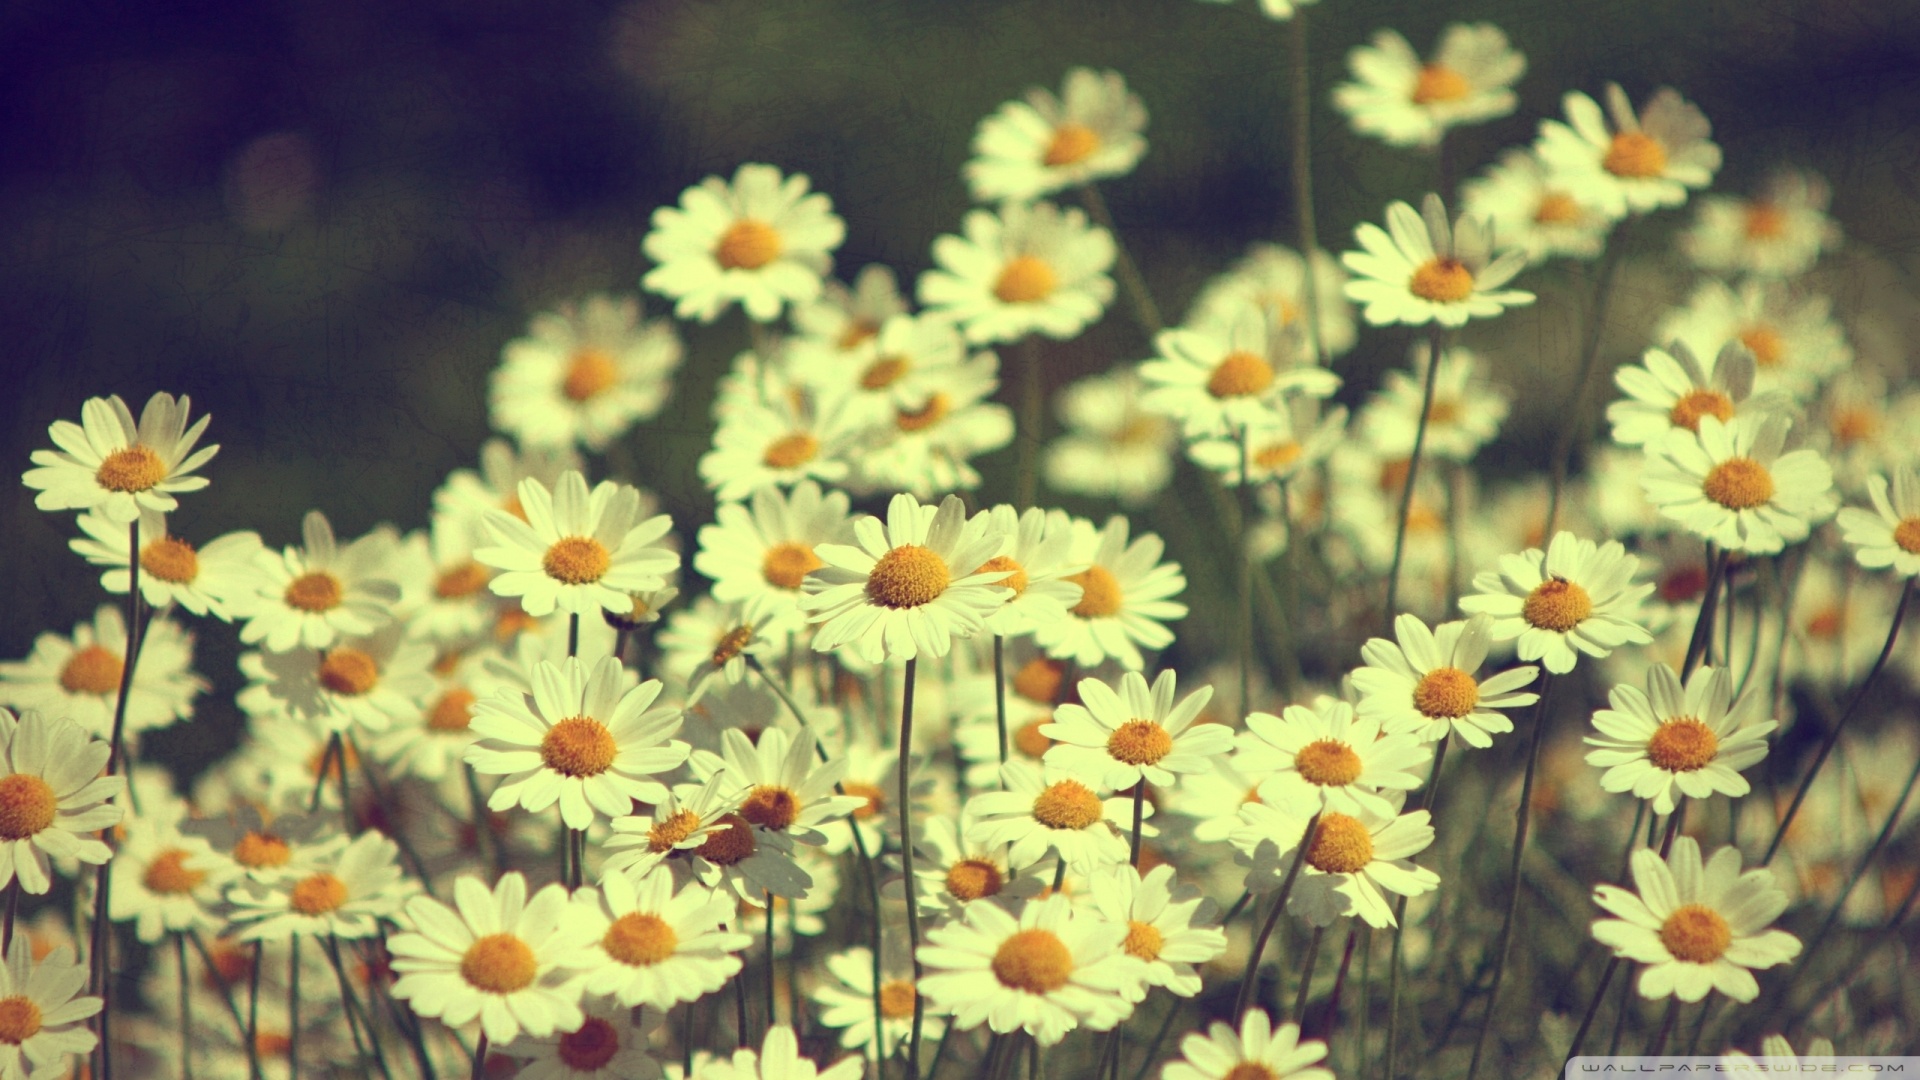 Vintage Daisies Photography Wallpaper 1920x1080 Vintage Daisies